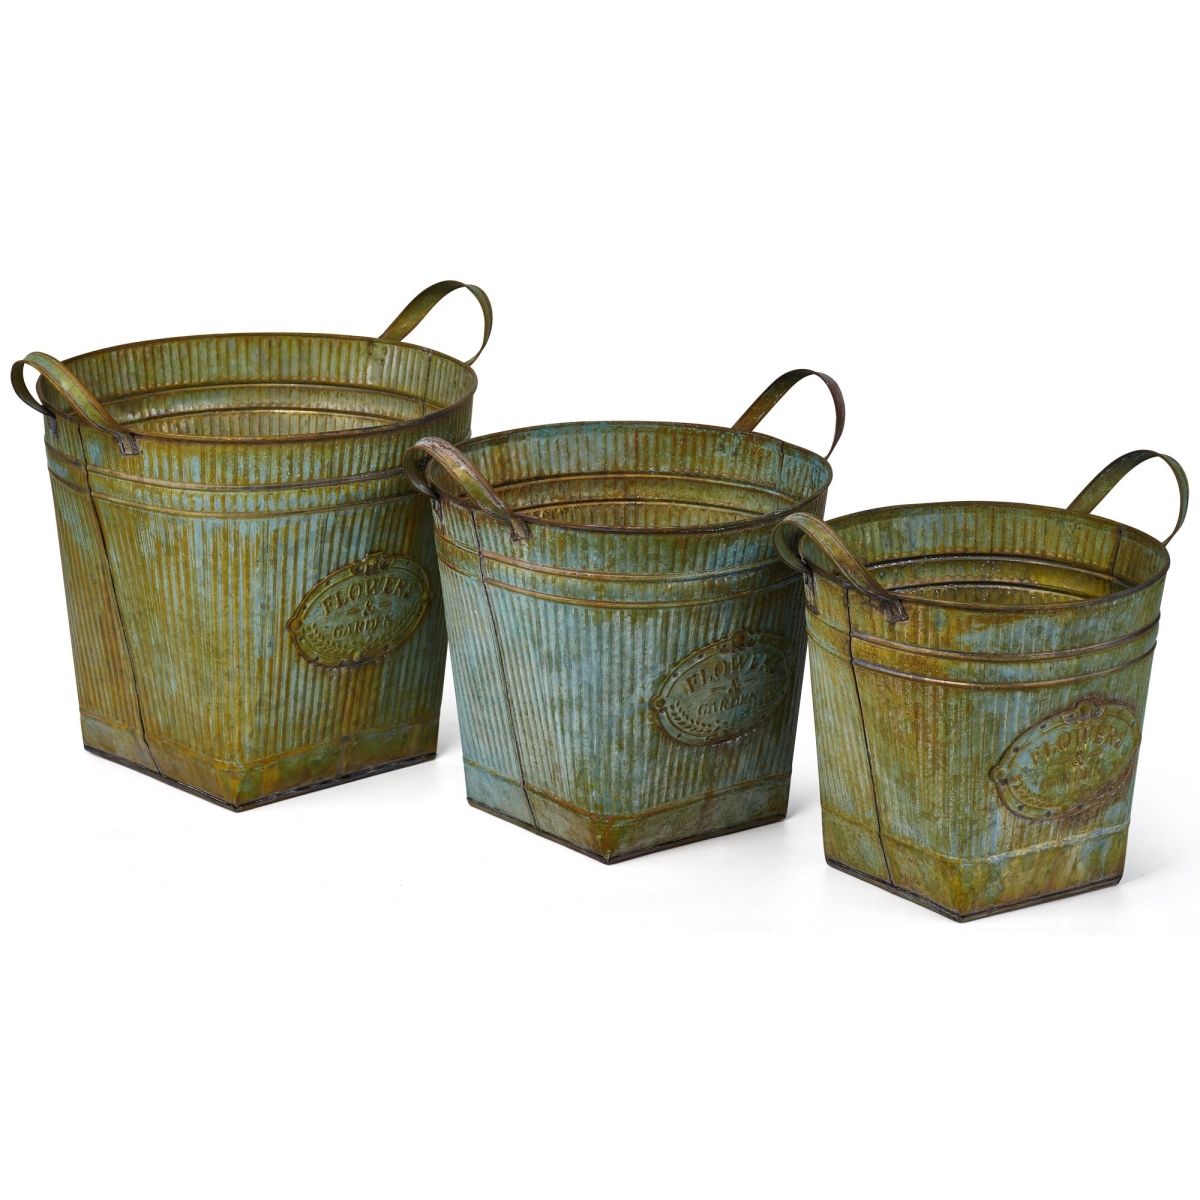 Imax Z27804-3 Werner Galvanized Planters With Rusted Finish - Green, Set Of 3